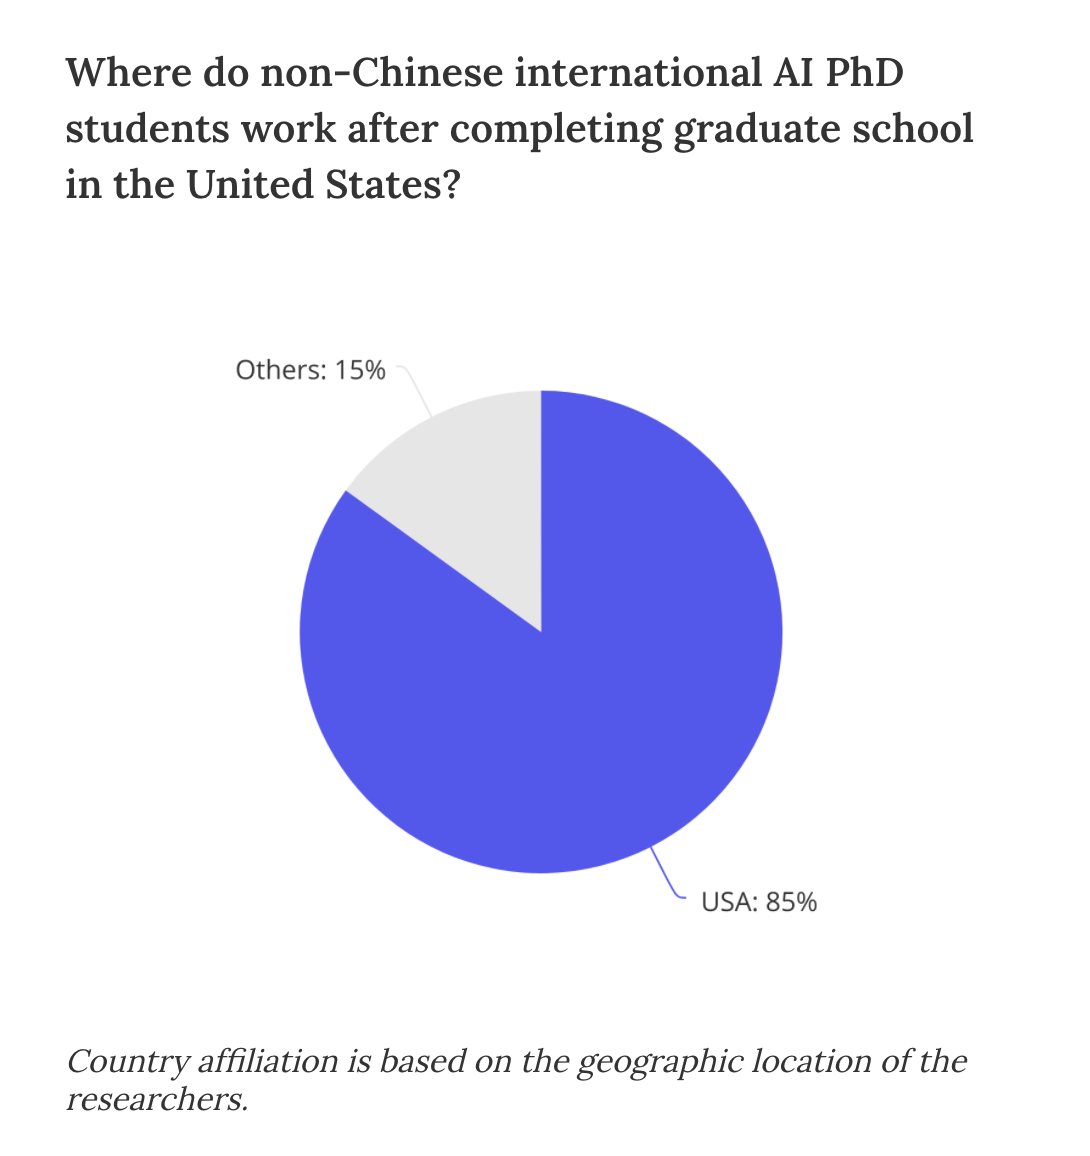 7/ When non-Chinese international students do an AI PhD in the US, 85% chose to stay in the US.  https://macropolo.org/digital-projects/the-global-ai-talent-tracker/